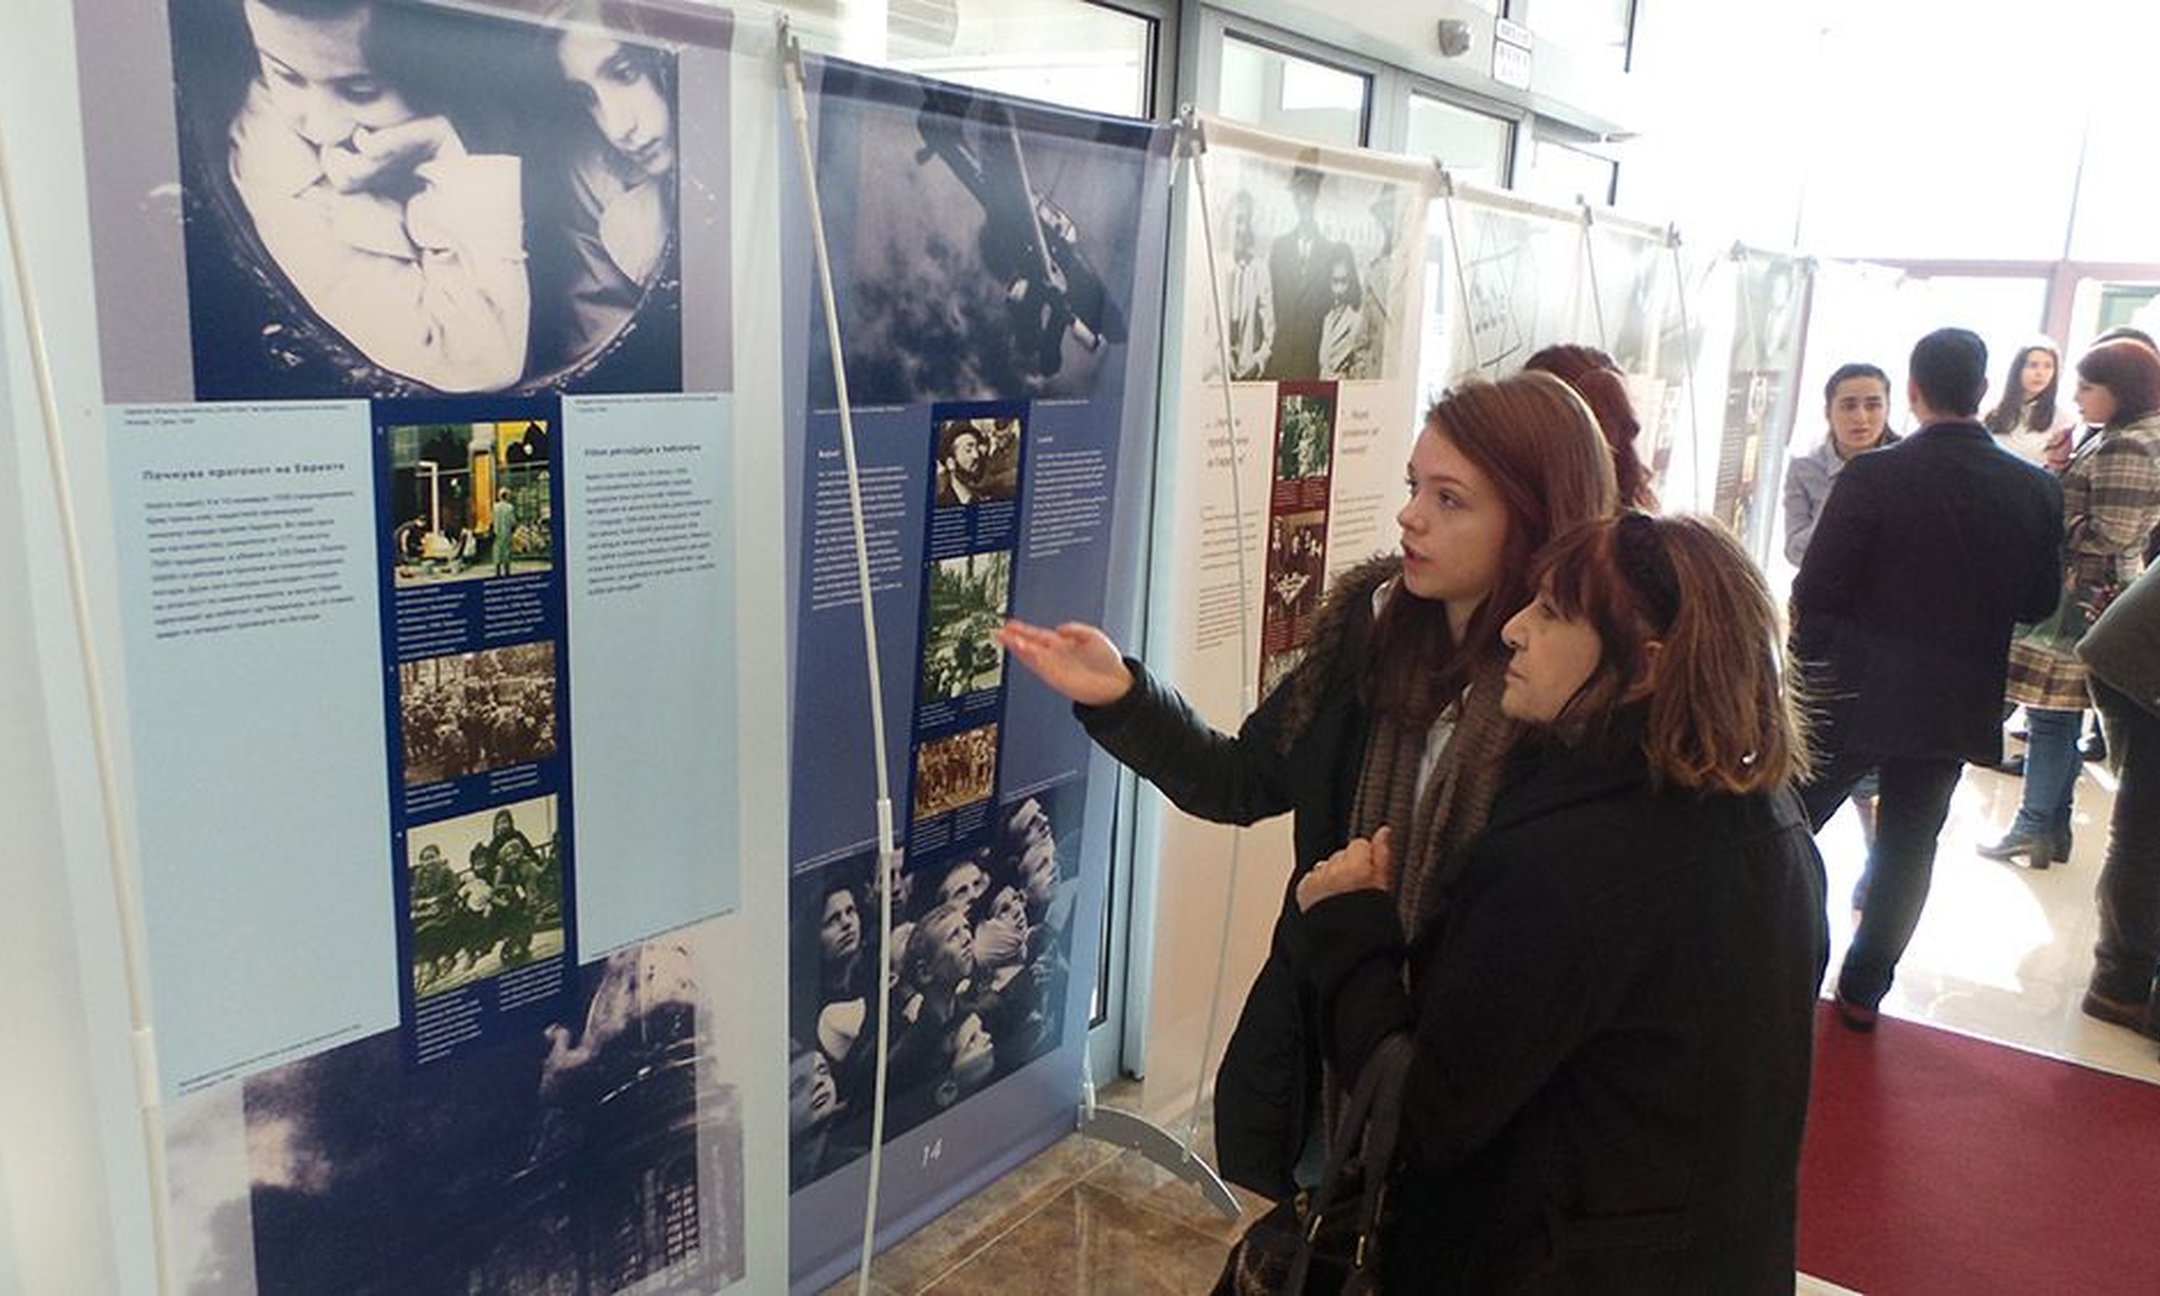 Peer guide presenting the exhibition in the first opening in Skopje (January 2016)